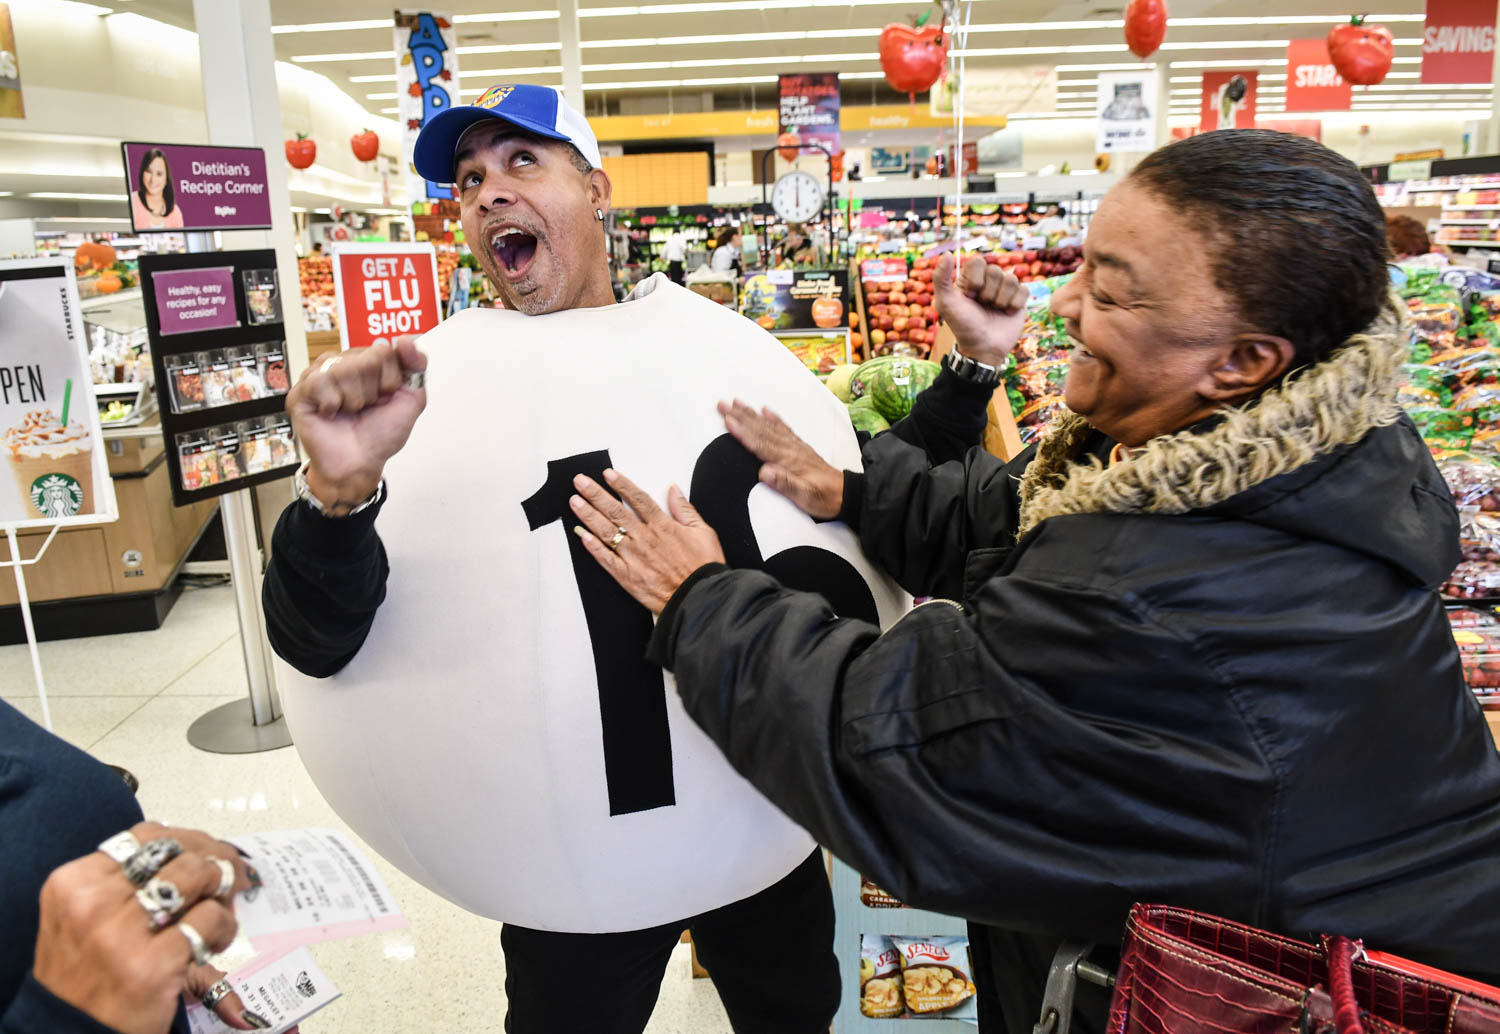 Kathy Clark, of Rock Island, rubs the "Lucky Number 16" costume, worn by Illinois Lottery ambassador Jose Cintron, Thursday, Oct. 18, 2018, at the HyVee grocery store in Milan. Lottery ambassadors gave away 970 free Mega Millions tickets Thursday. Approximately 80 to 100 people were lined up when the ticket giveaway started at 10 am.  (Todd Mizener - Dispatch/Argus) 